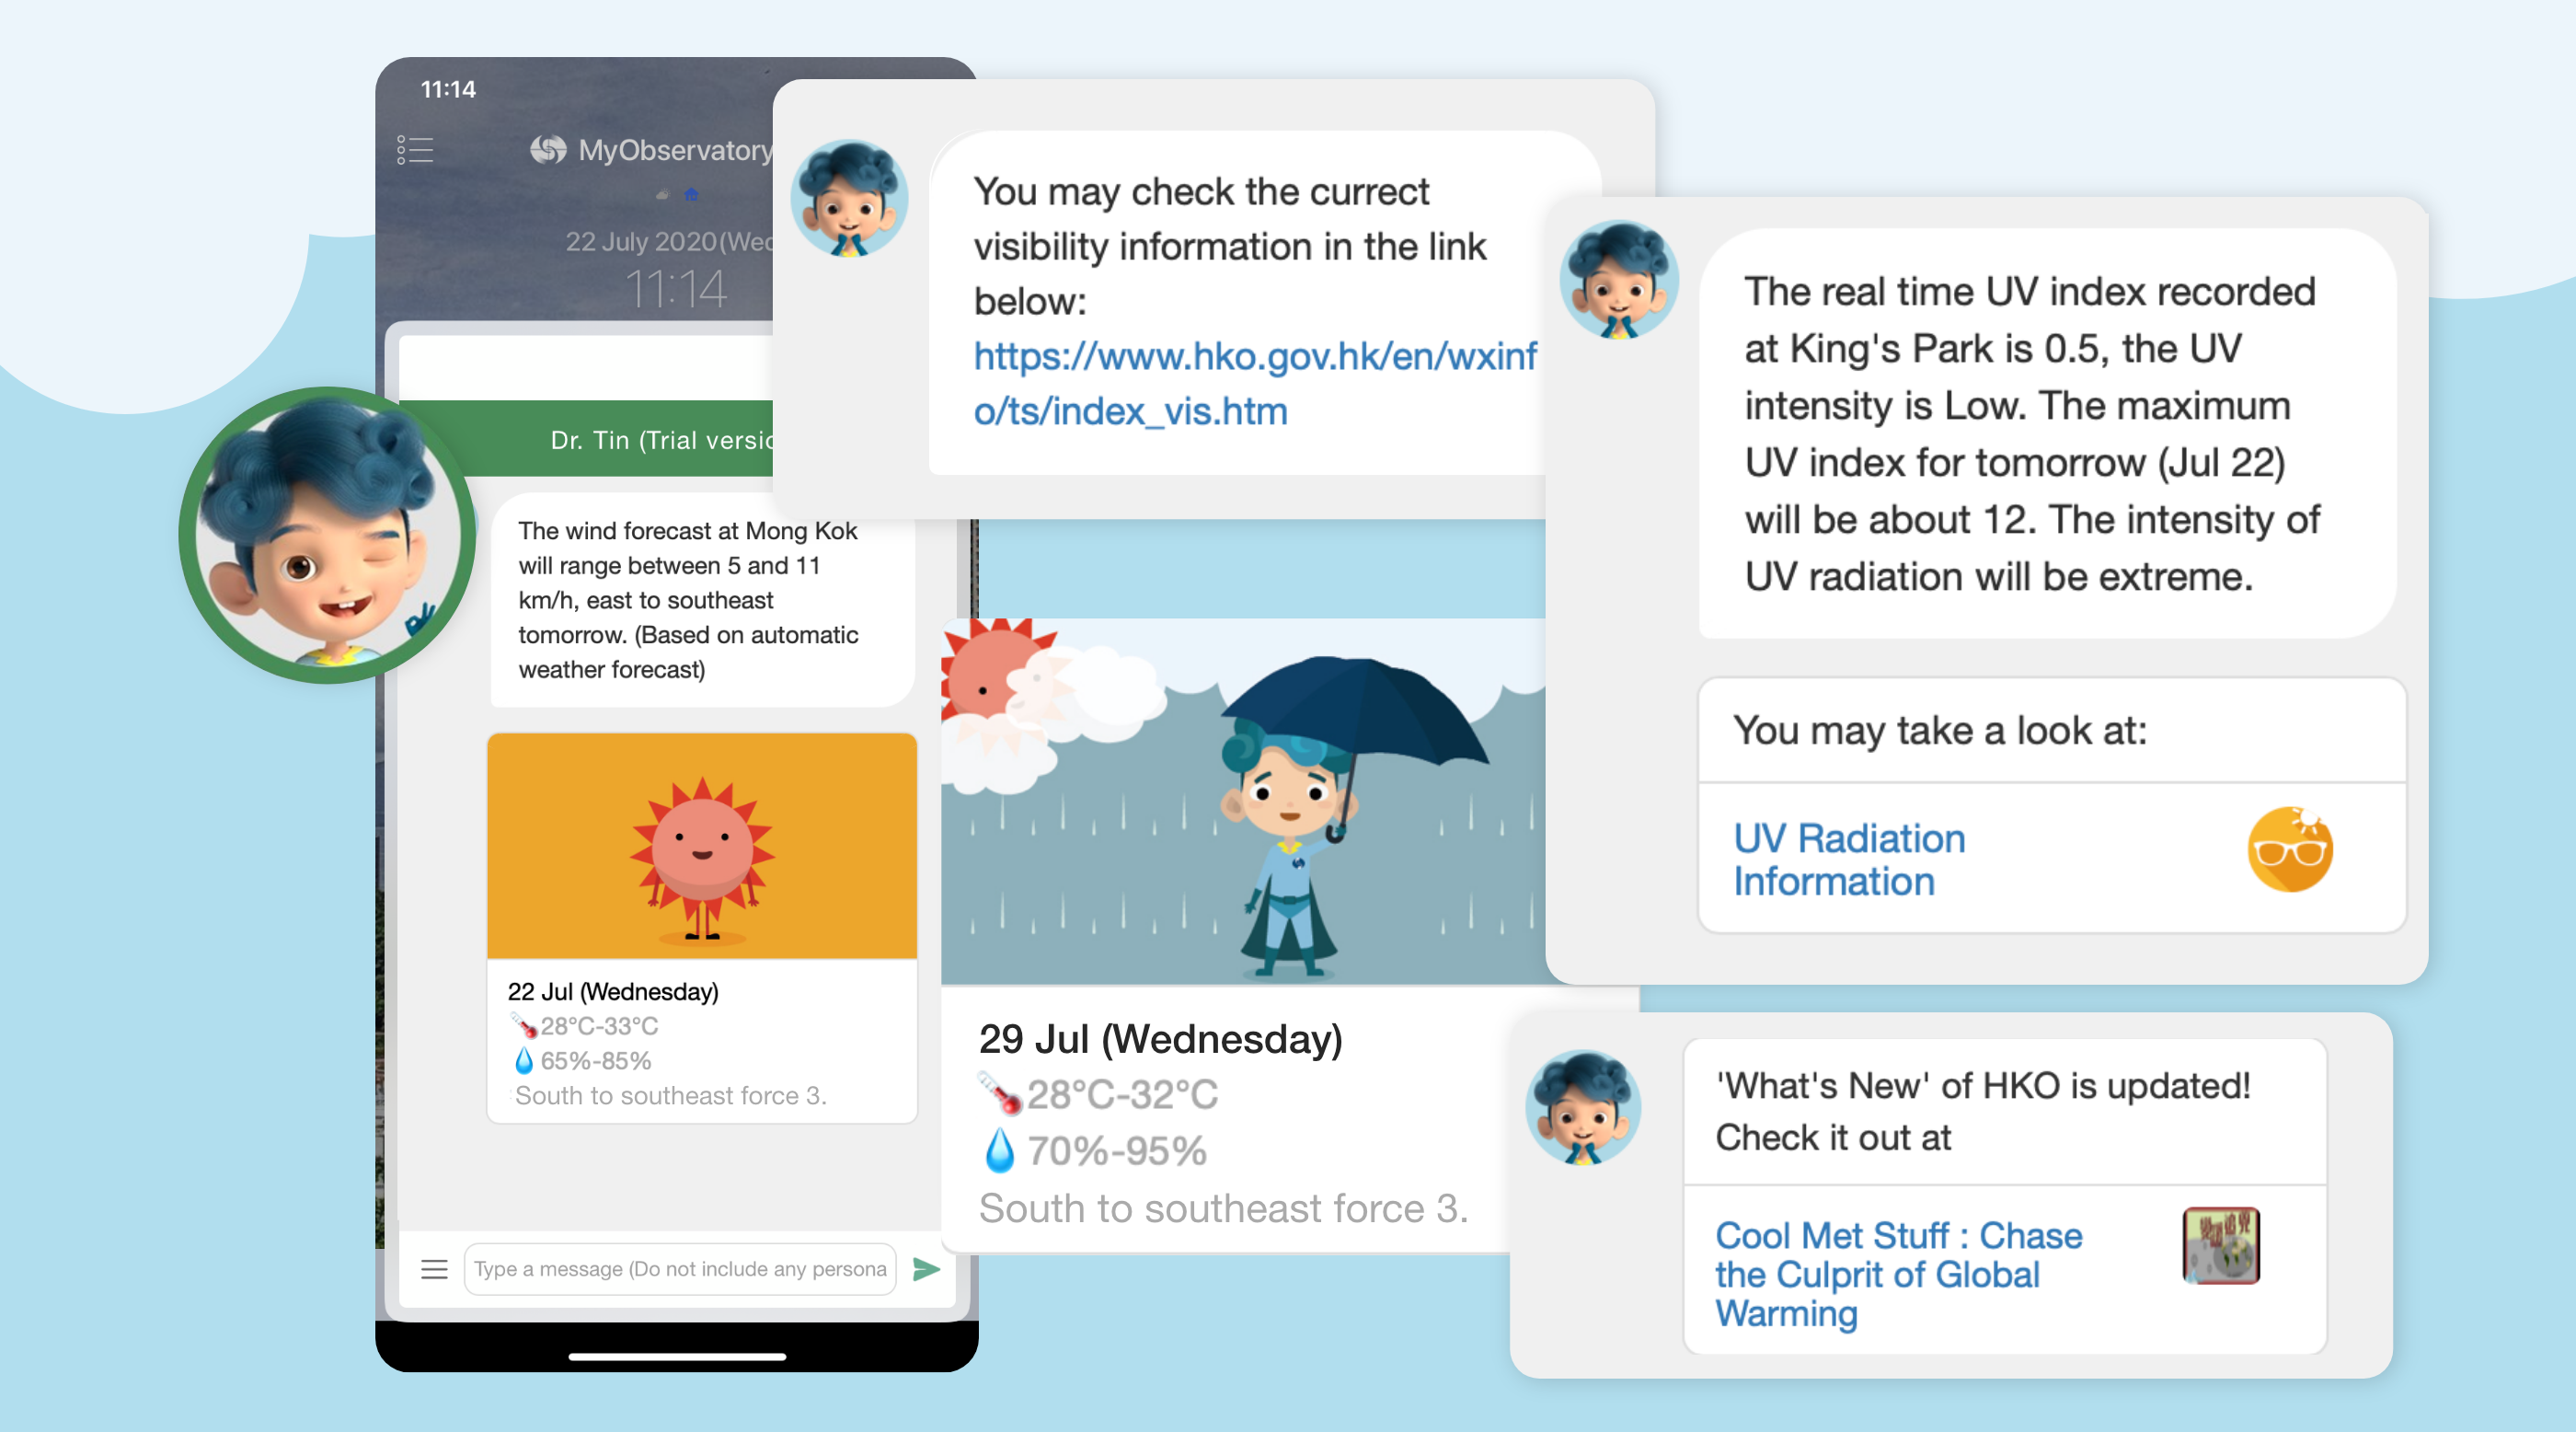 More information provided in 'Dr Tin' Chatbot Service